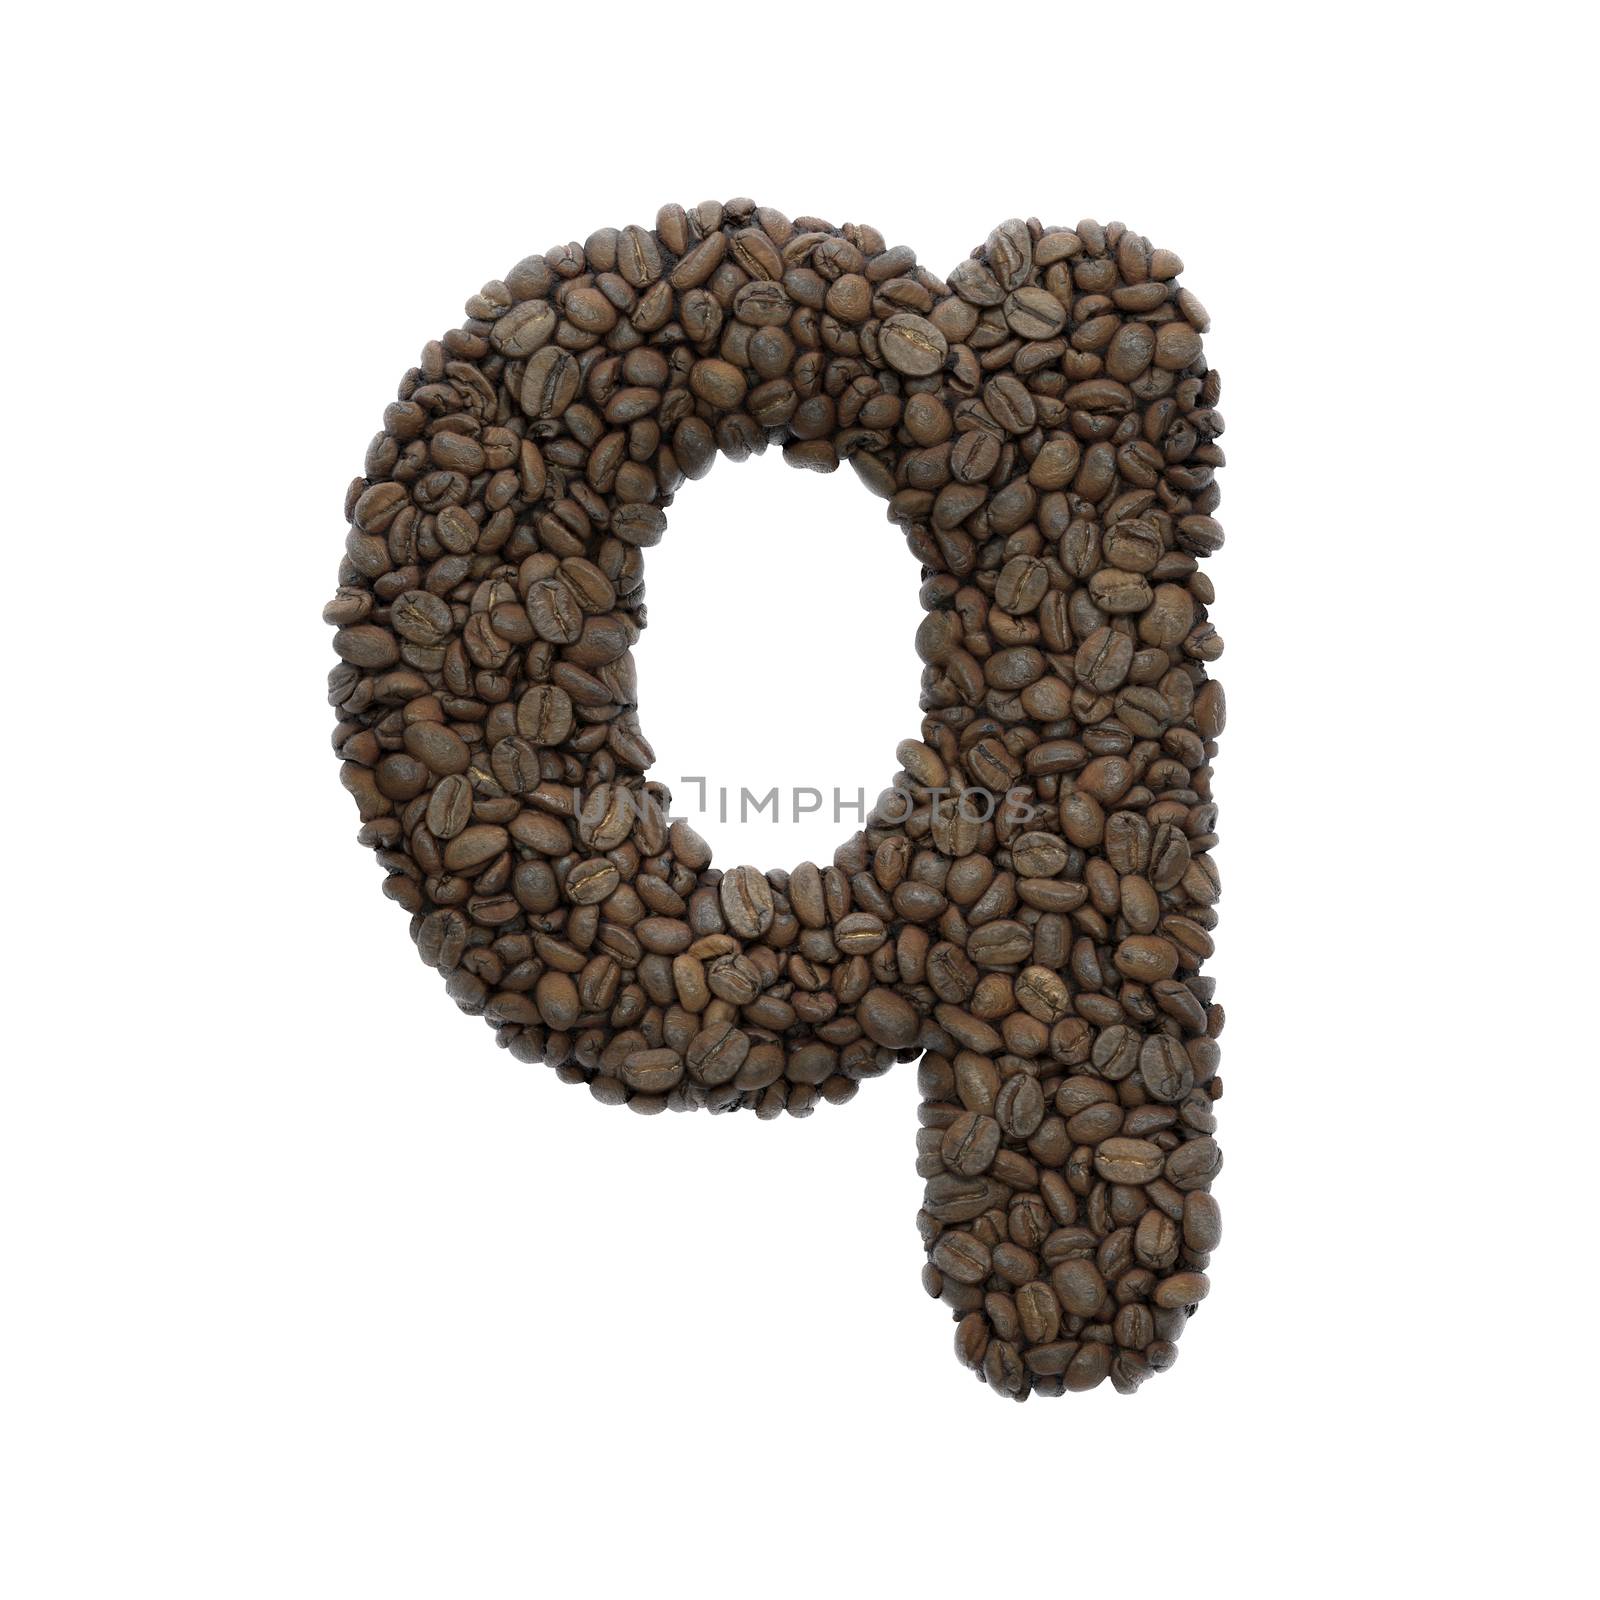 Coffee letter Q - Lower-case 3d roasted beans font - Suitable for Coffee, energy or insomnia related subjects by chrisroll